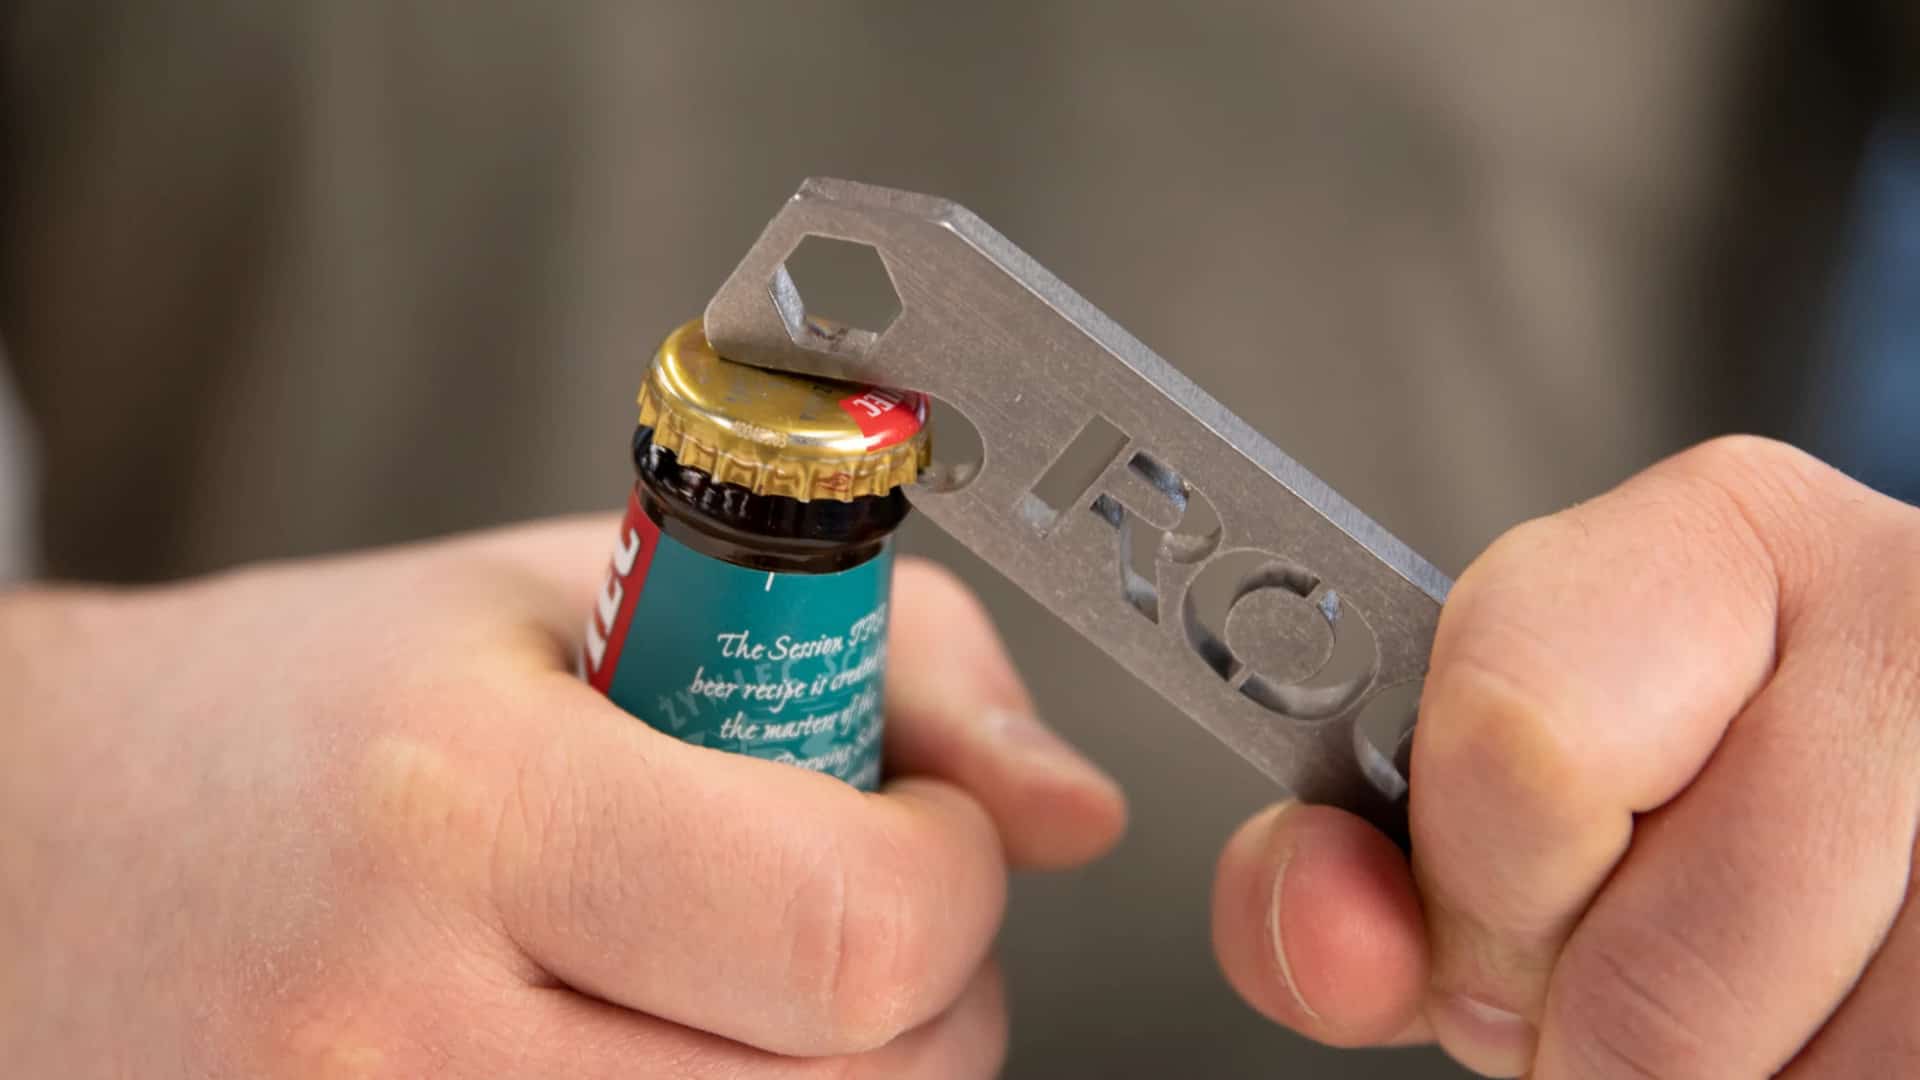 Rogue Wrenches opening a bottle